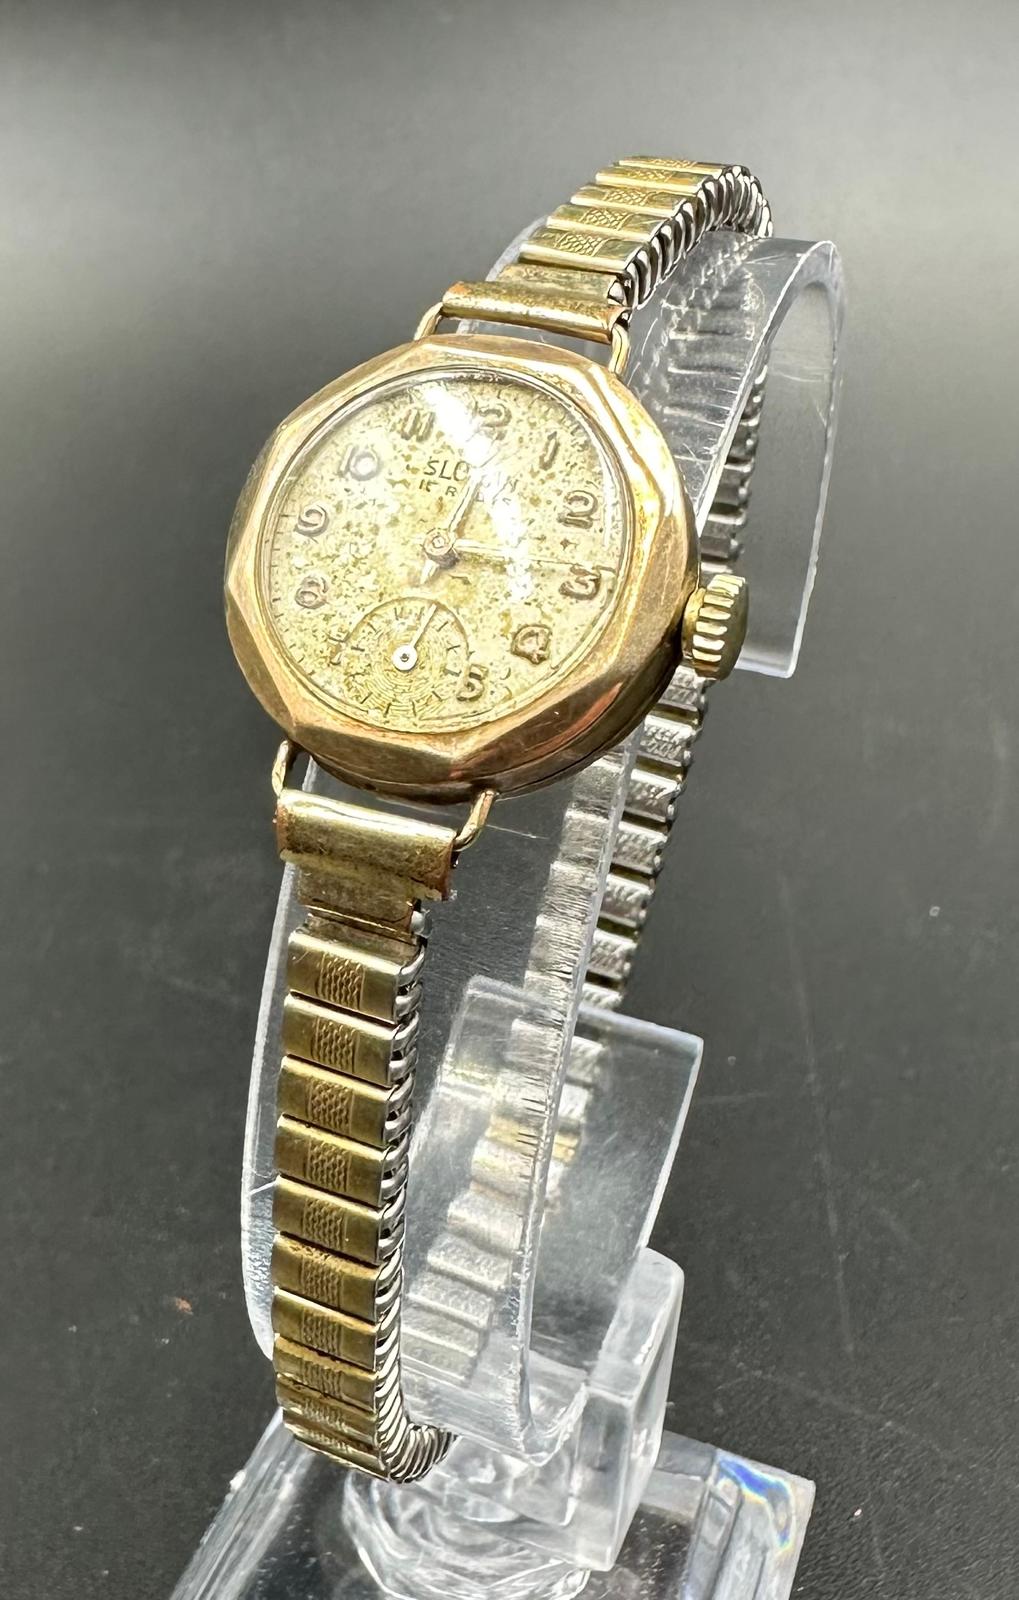 A 9ct gold watch on a stainless steel bracelet